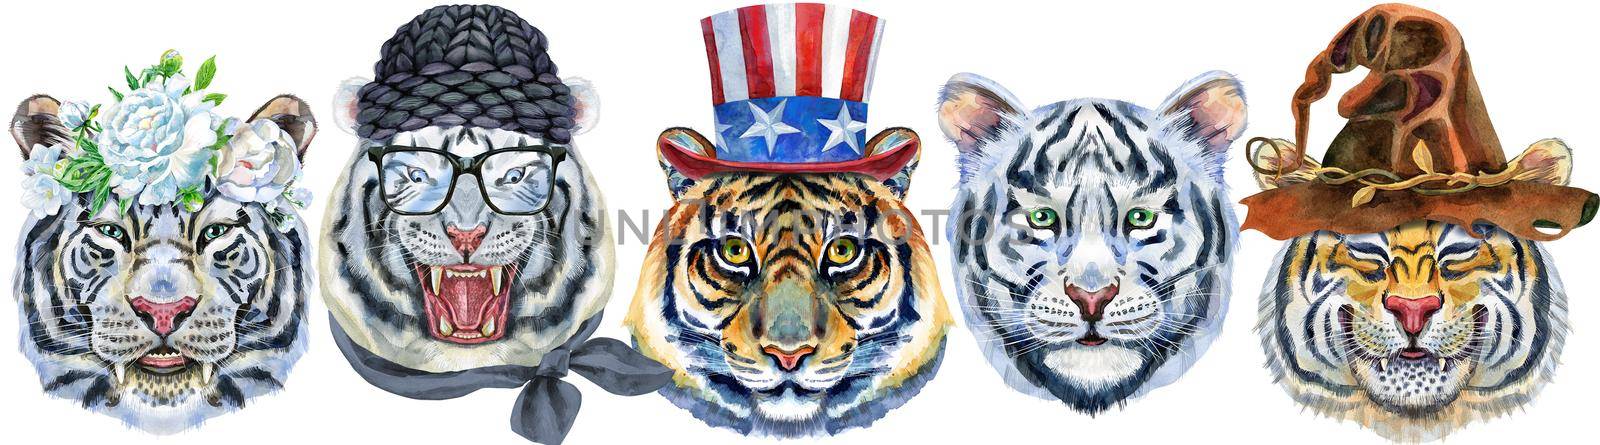 Watercolor illustration of tigers in a wreath of white peonies, winter black hat, uncle sam hat and brown witch hat